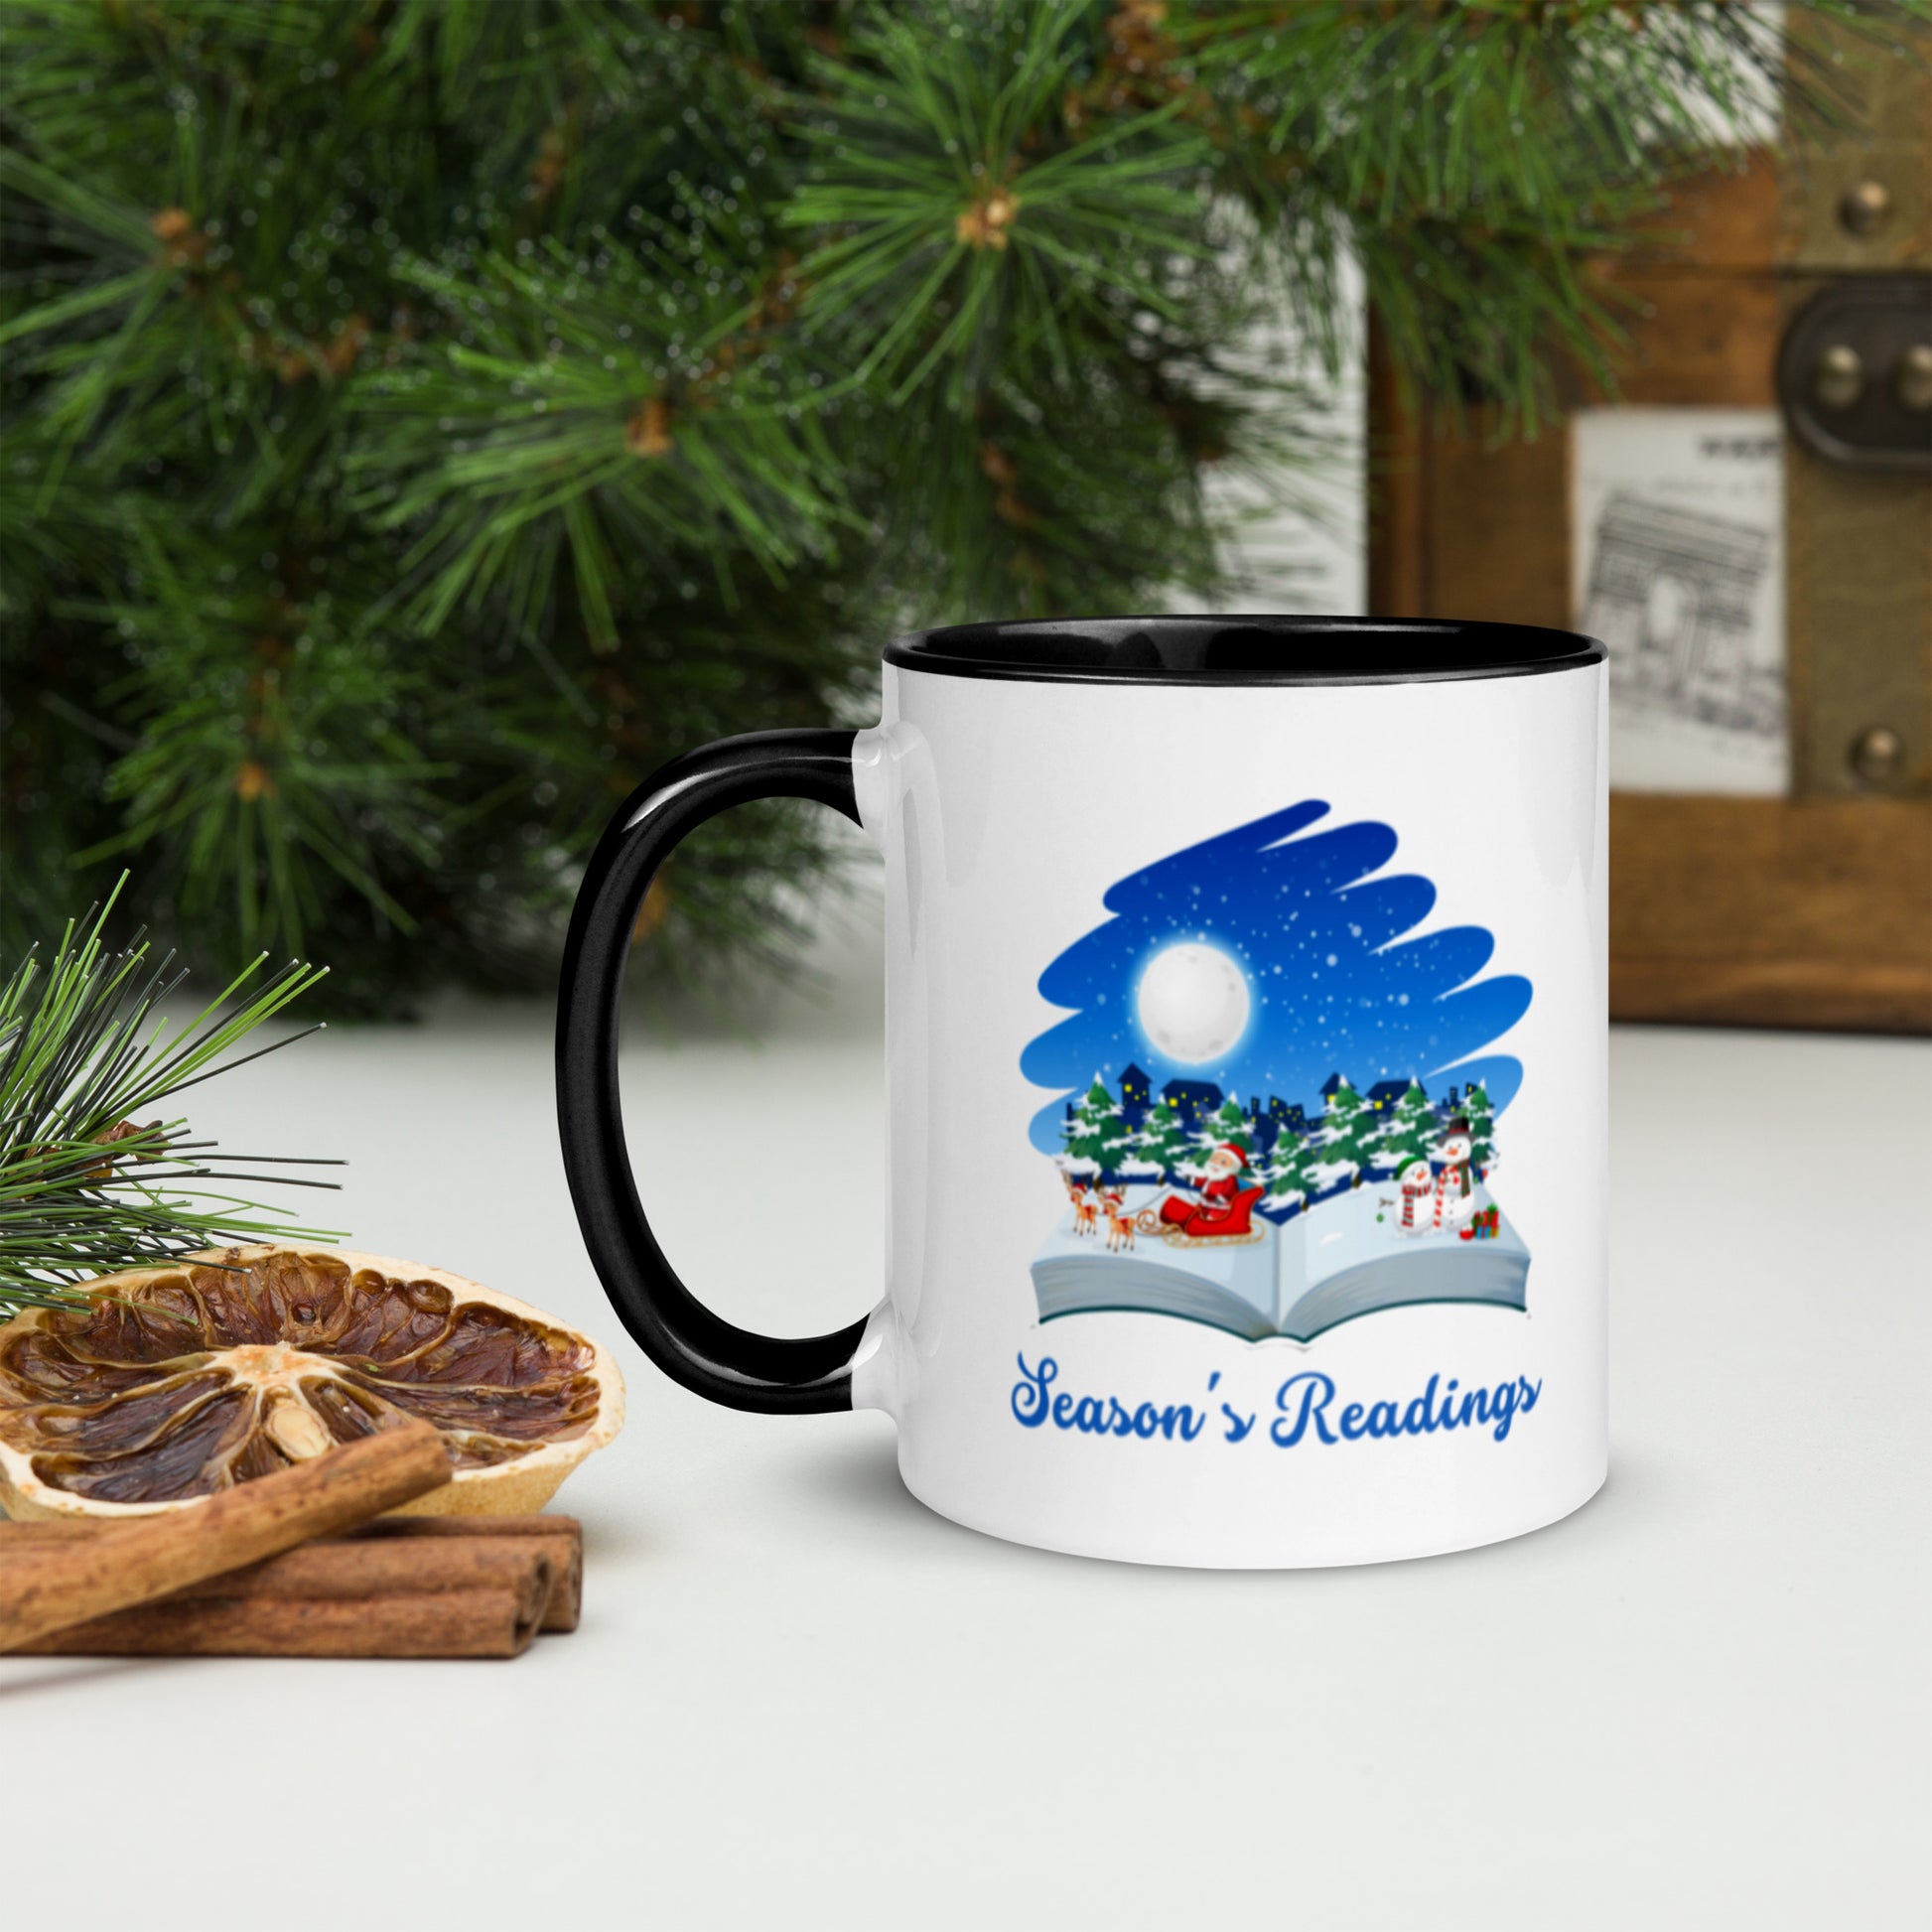 Season's Readings Mug with Color Inside-11oz. - The Spinster Librarian Shop